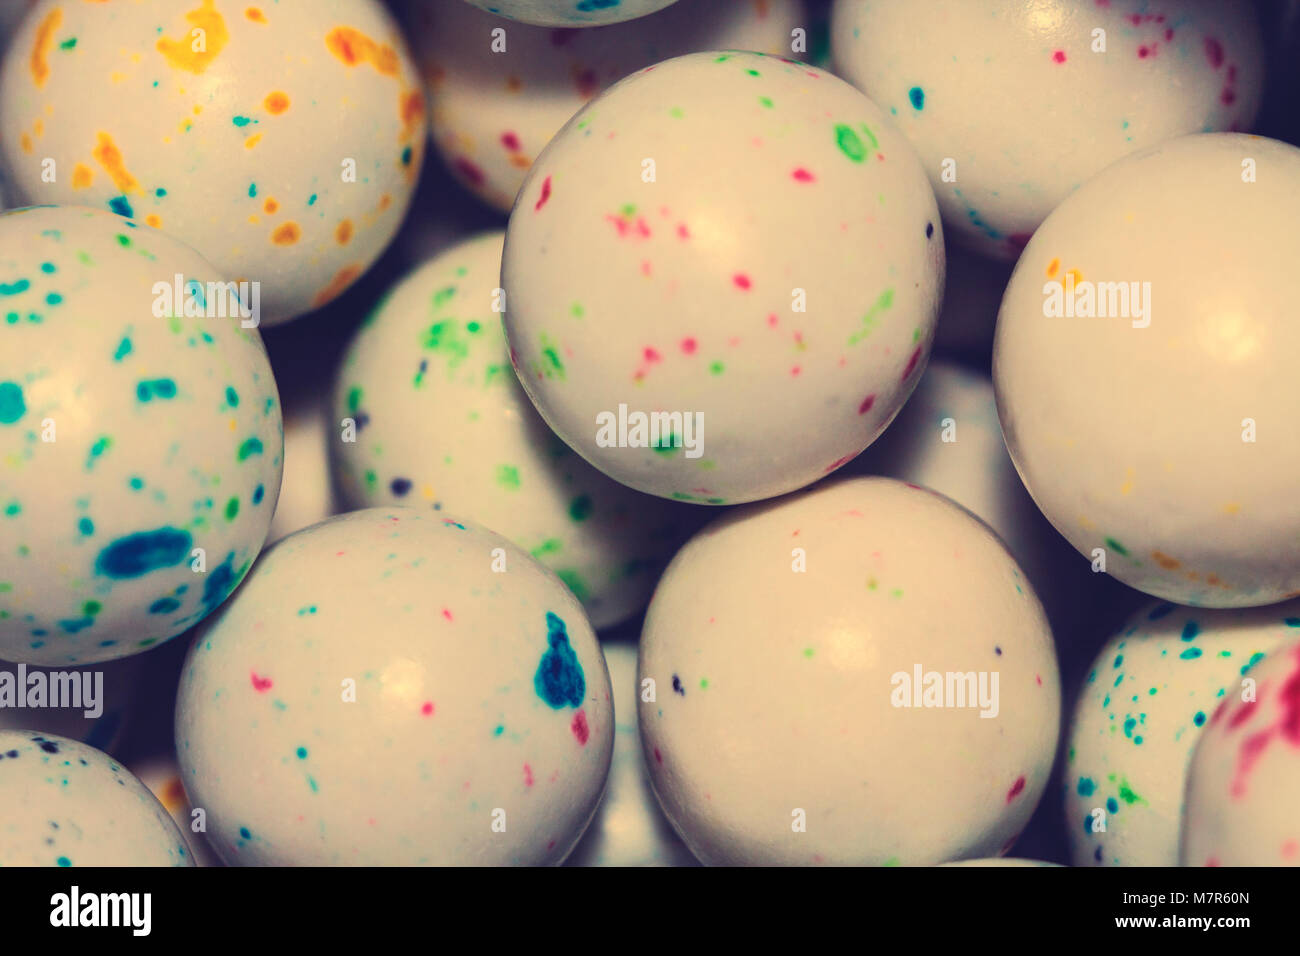 A heap of colorful round chewing gum. Stock Photo